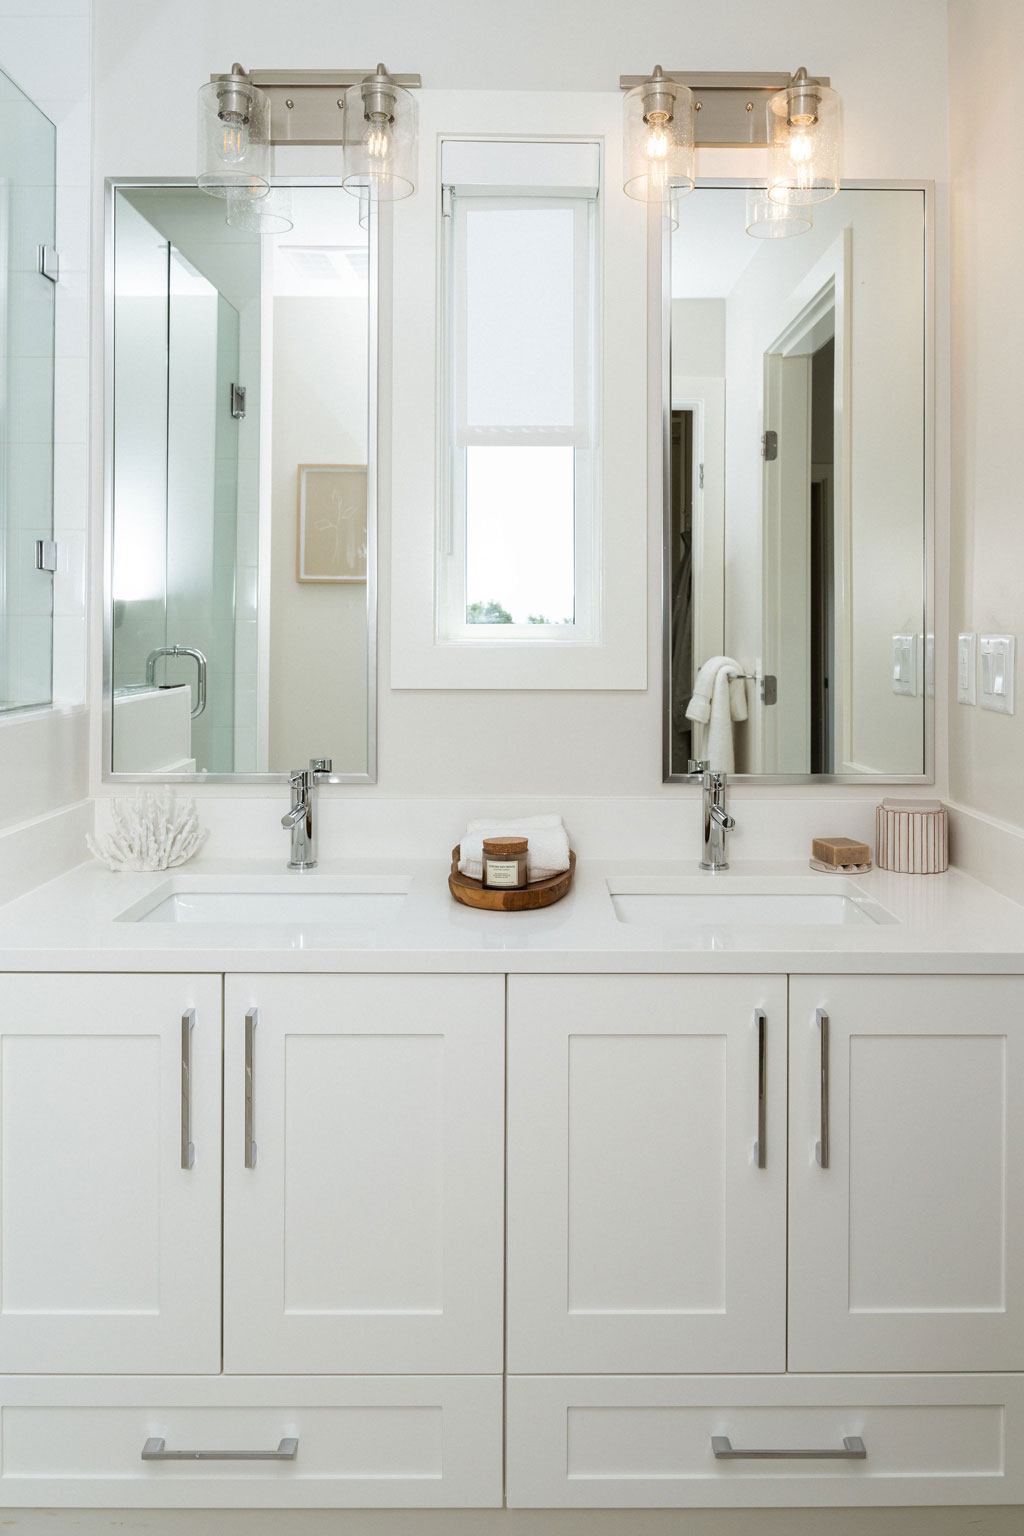 http://fox%20and%20aikins%20unit%20bathroom%20view%20of%20double%20sink%20and%20mirrors